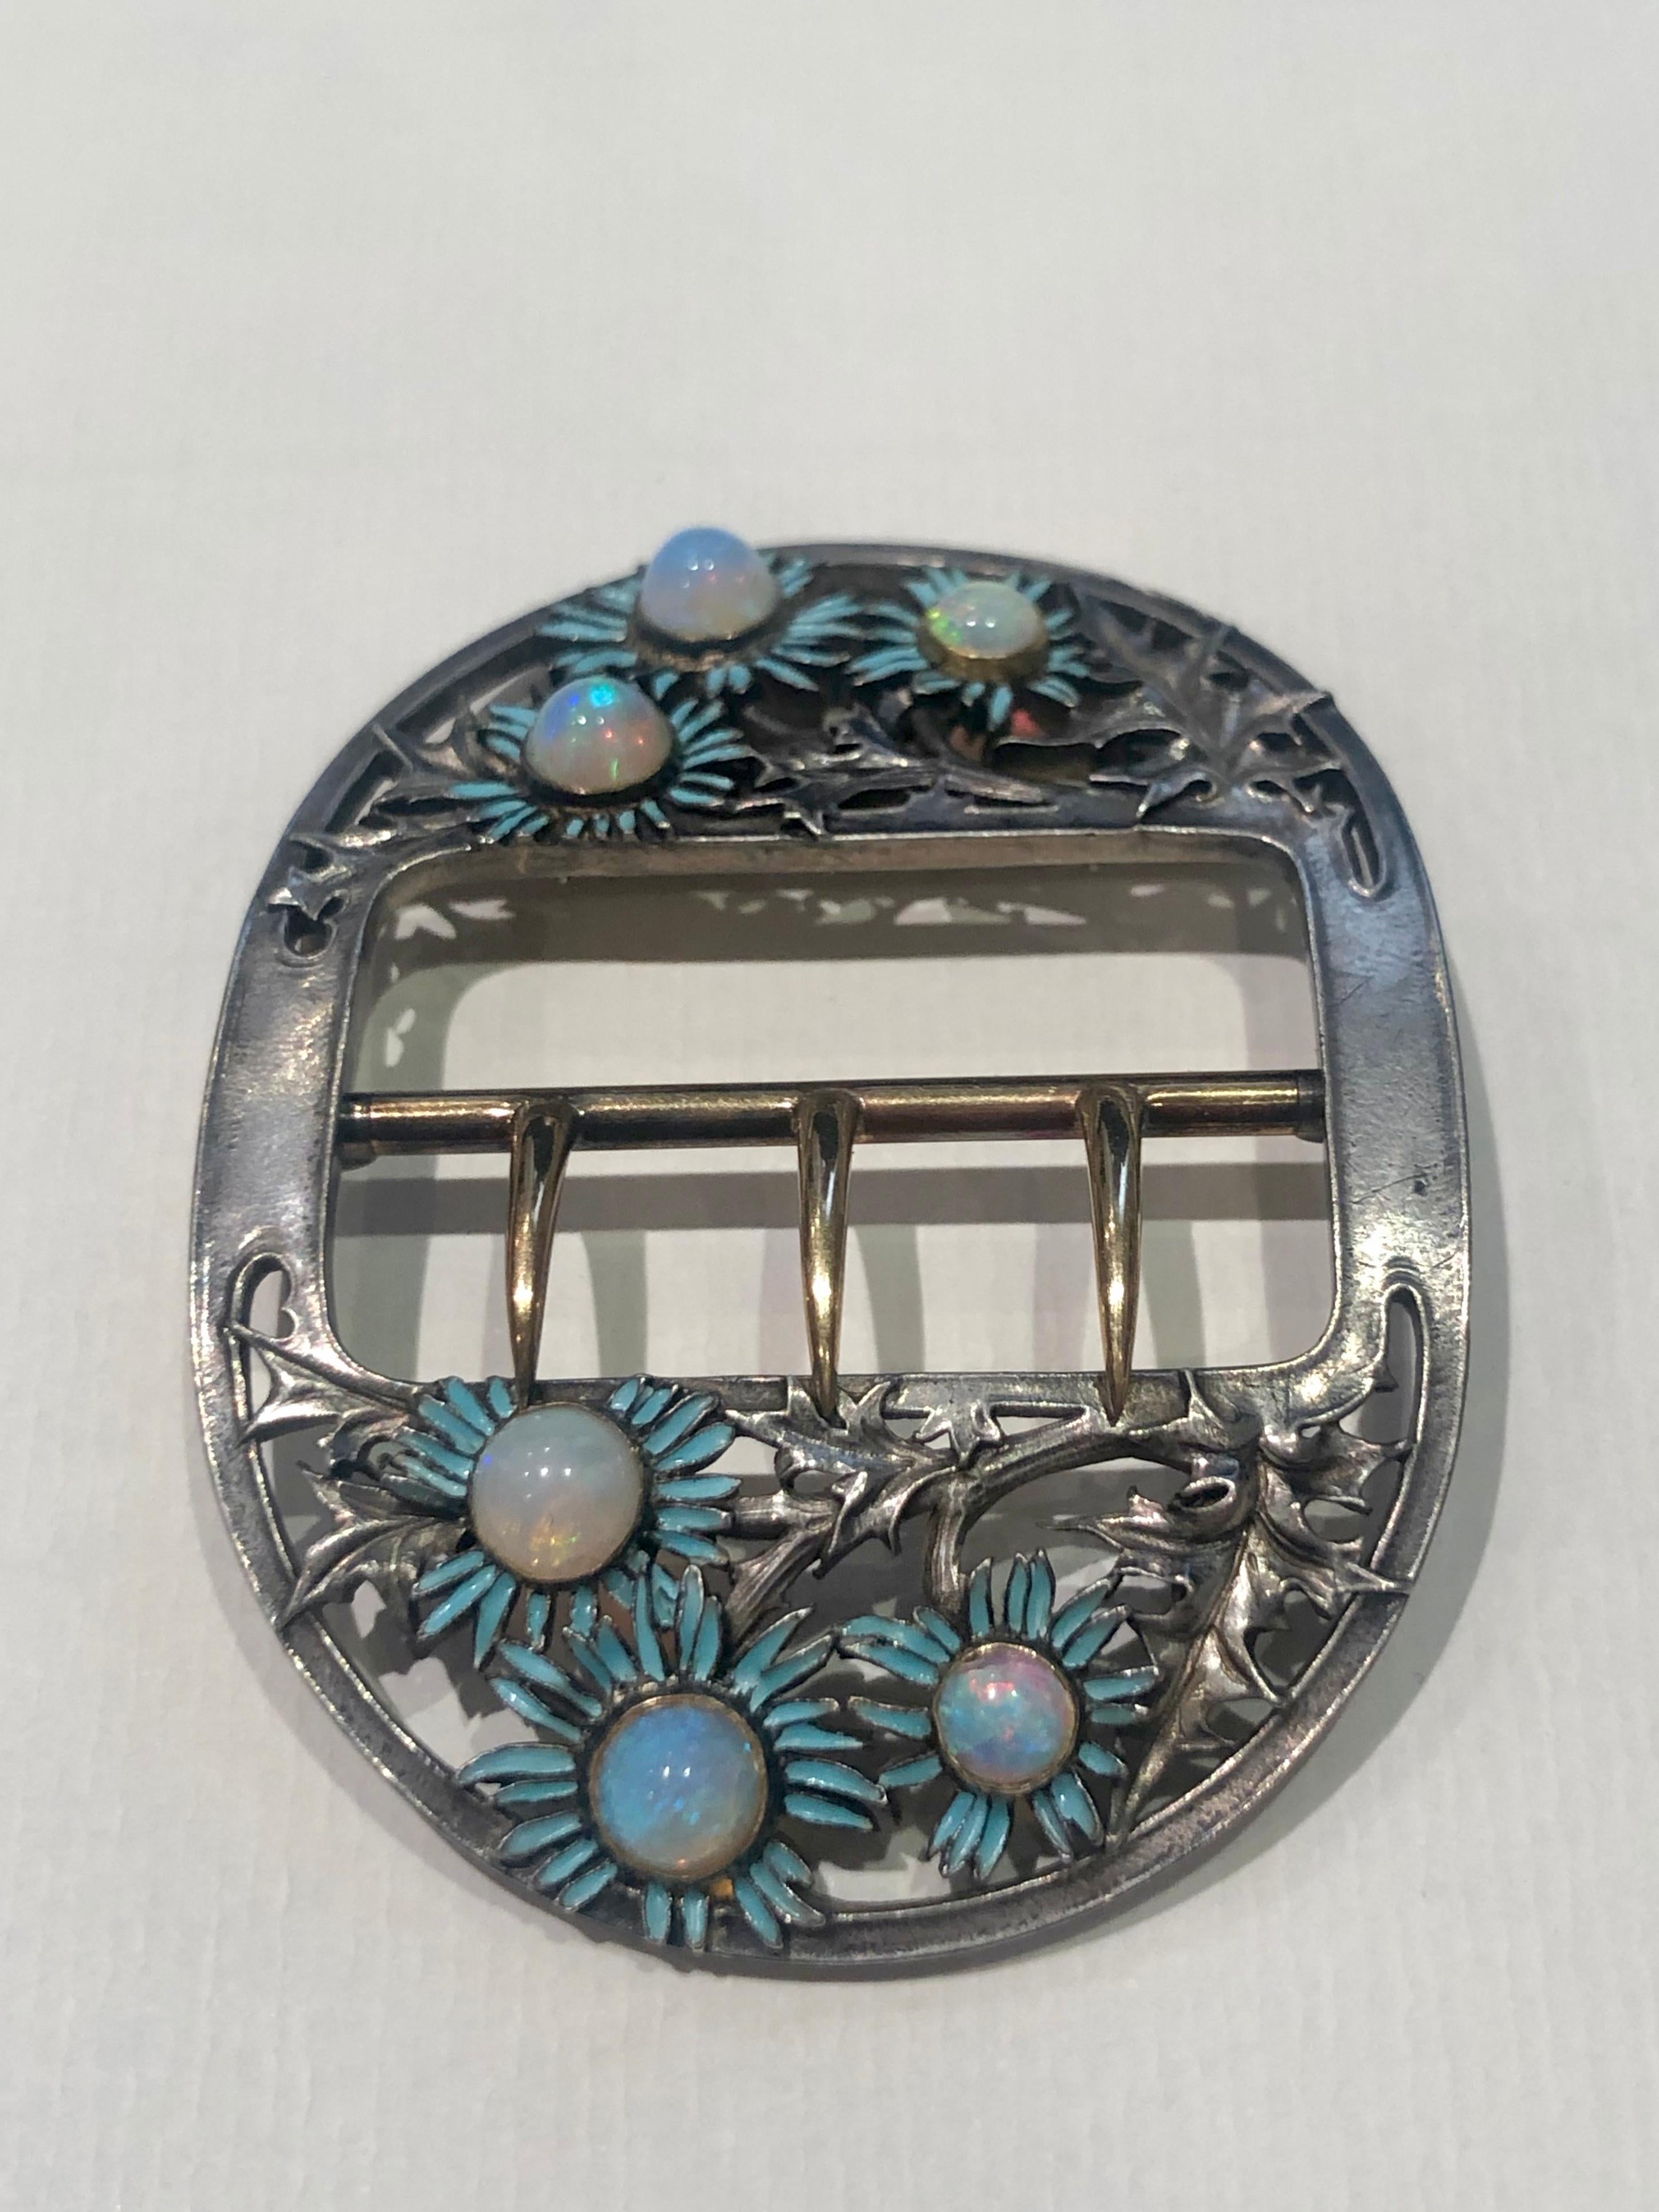 Unique Blue Daisies buckle by René Lalique circa 1890. 

Buckle is made with silver, yellow gold and six opal stones in center of blue enamel daisies. 

All parts of the buckle are original. No restoration at all. 